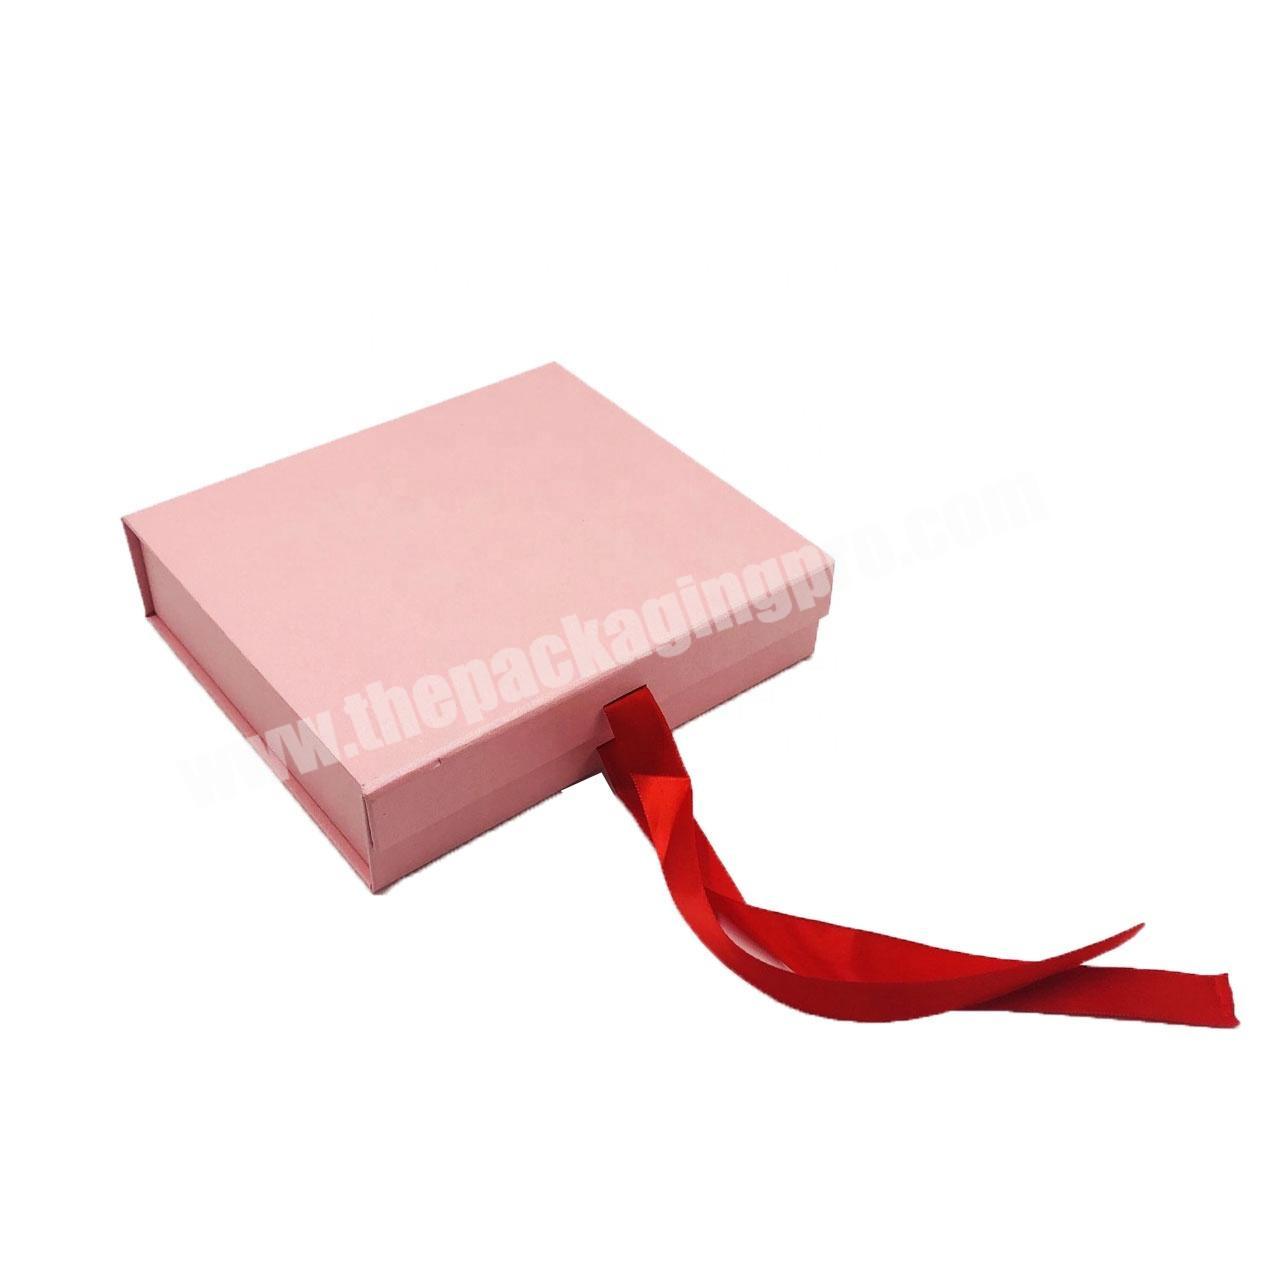 Rigid Luxury Ribbon Gift Boxes Magnetic Closure Lid Foldable Paper Custom Cosmetic Packaging Box For Dress Tea Jewelry